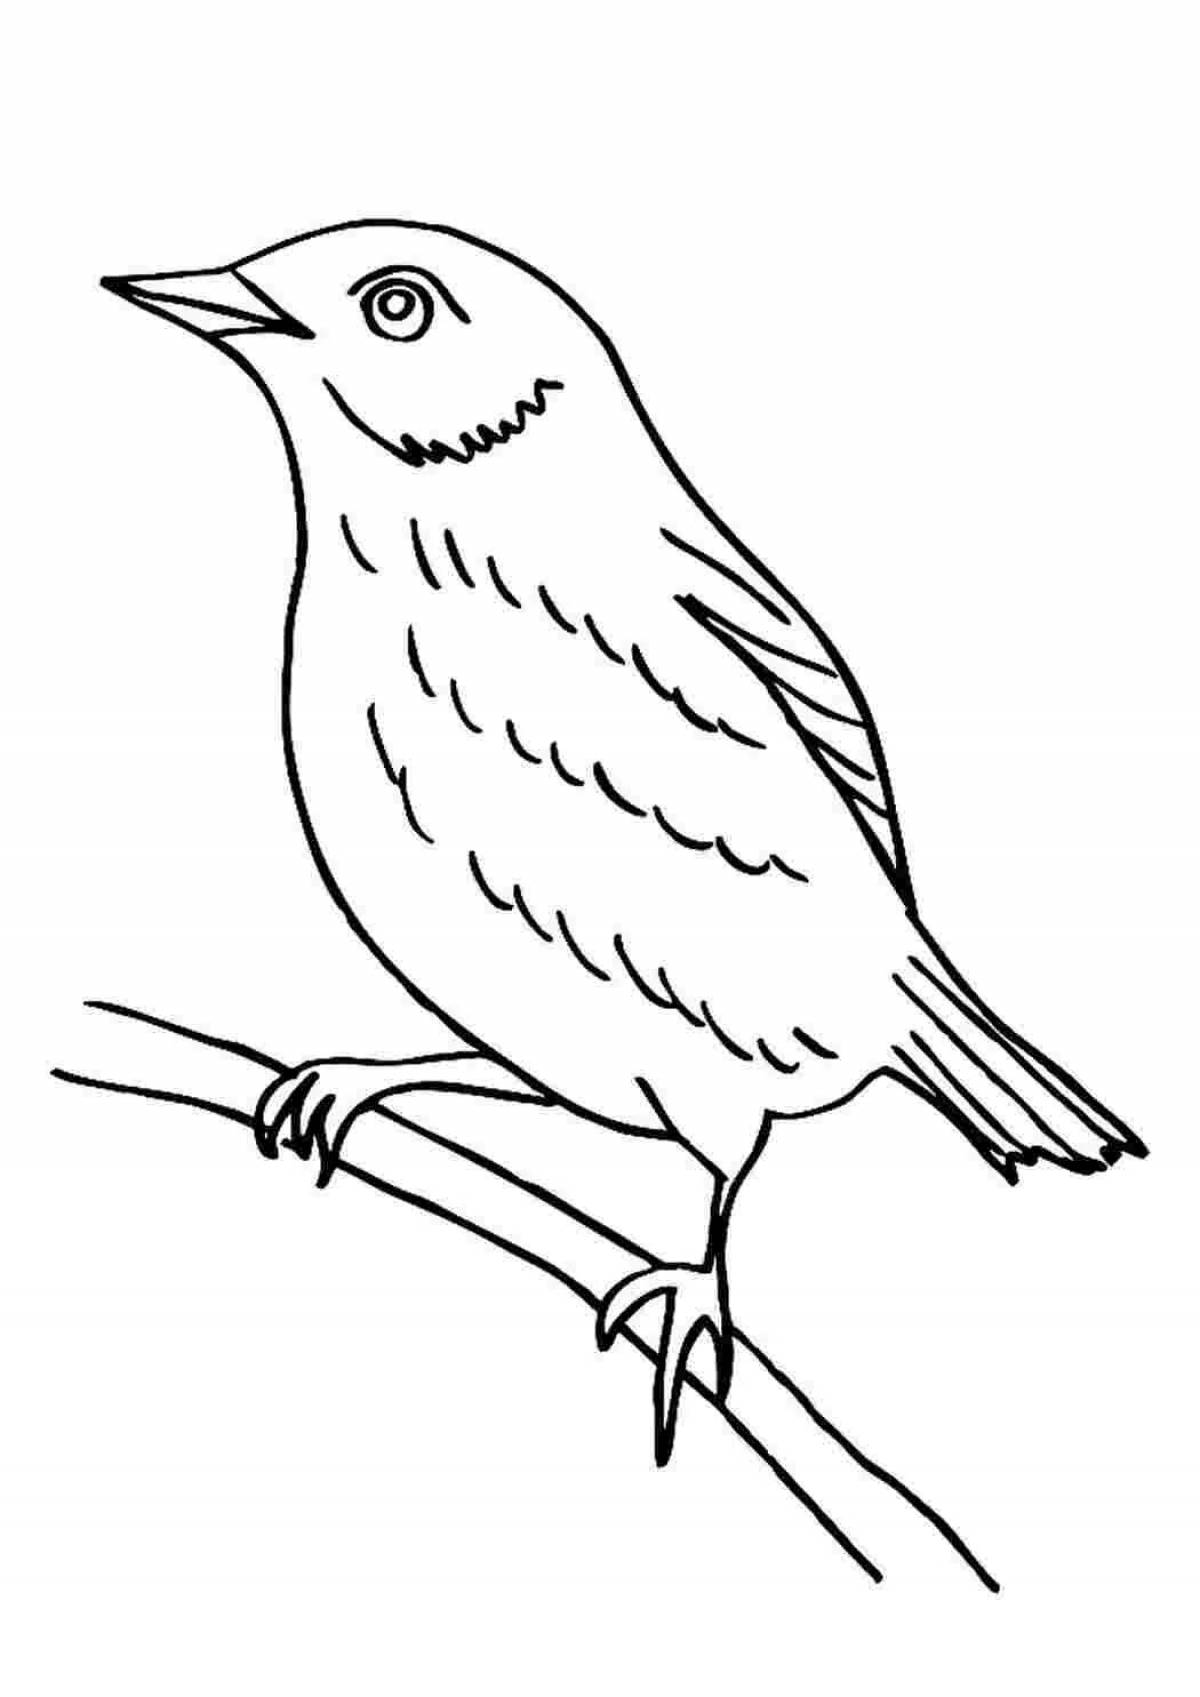 Creative starling coloring book for kids